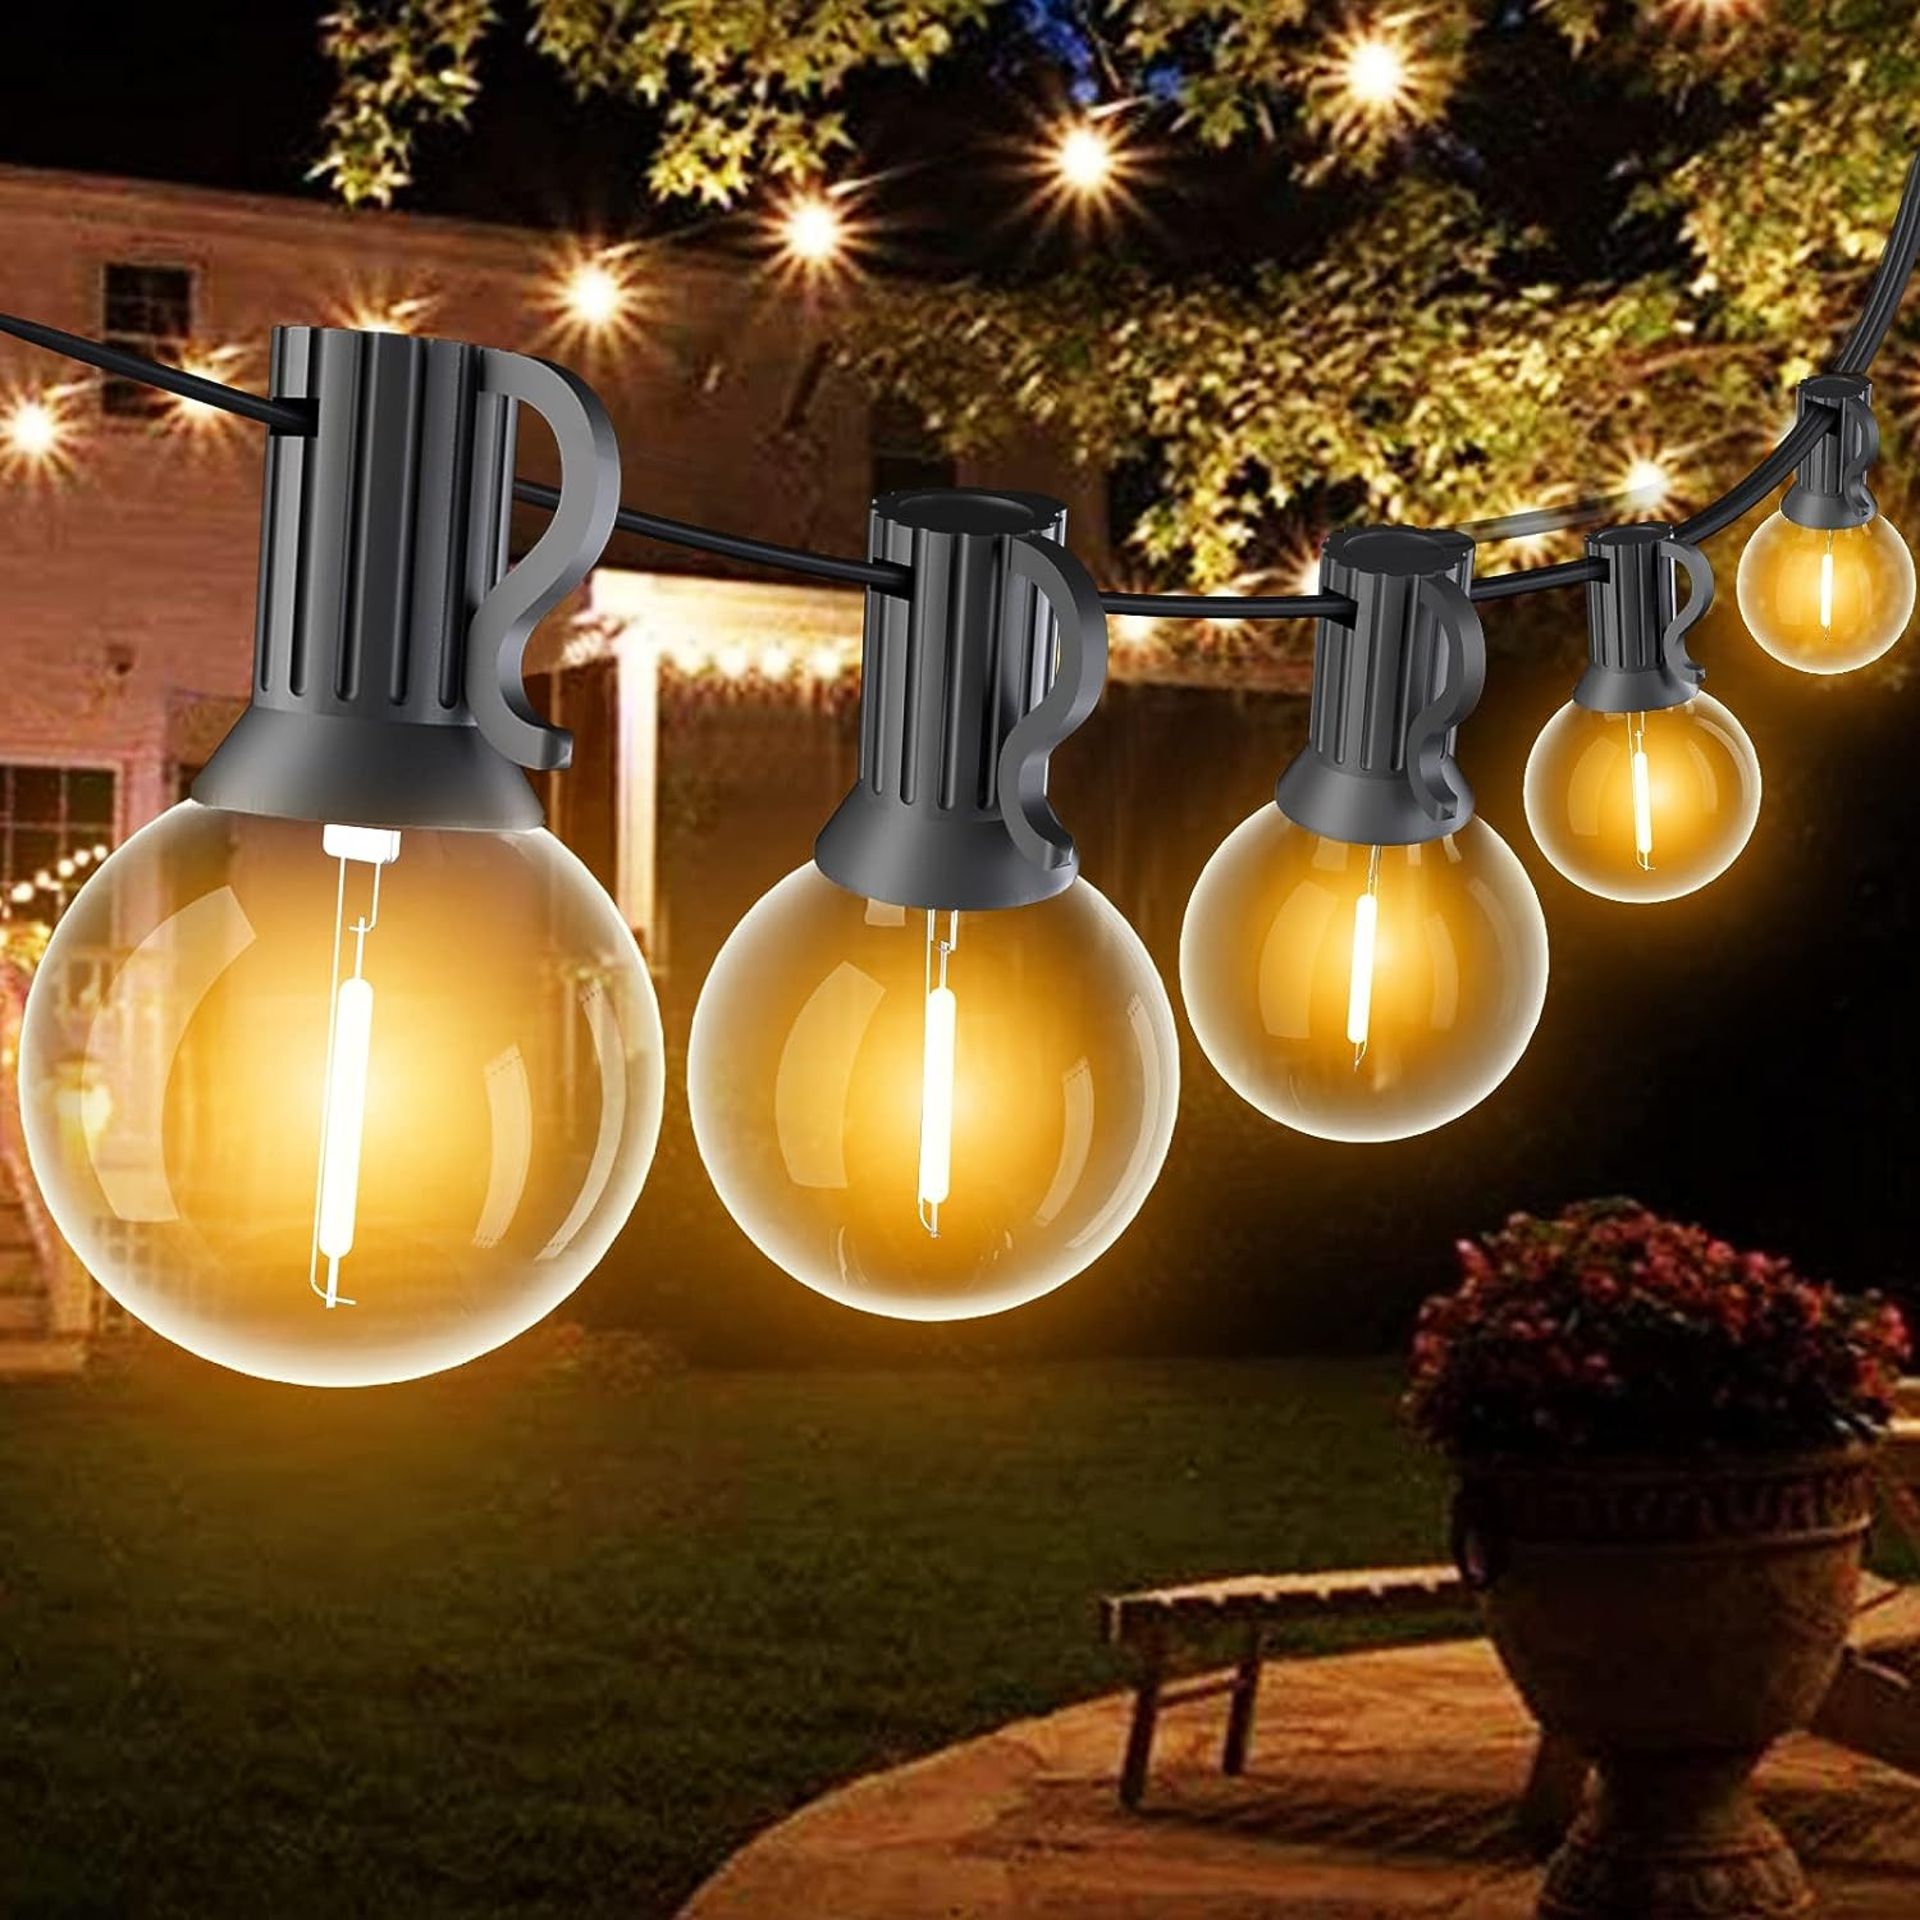 RRP £19.99 SUWIN Outdoor Festoon Lights Mains Powered, 30FT G40 LED String Lights Outdoor,